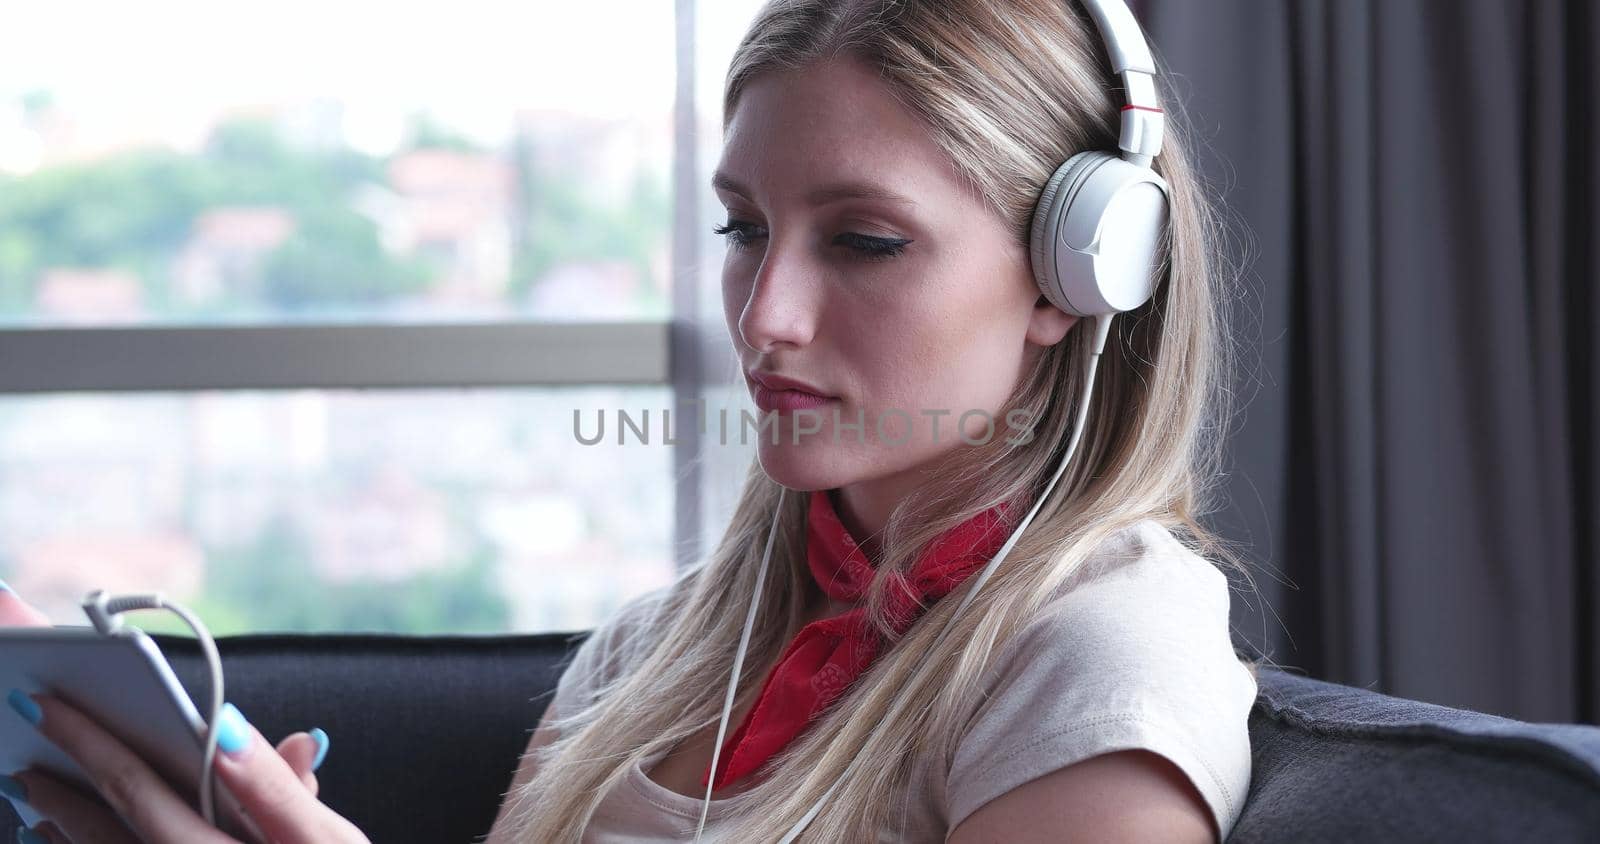 woman listening to music with sun flare coming from window of apartment